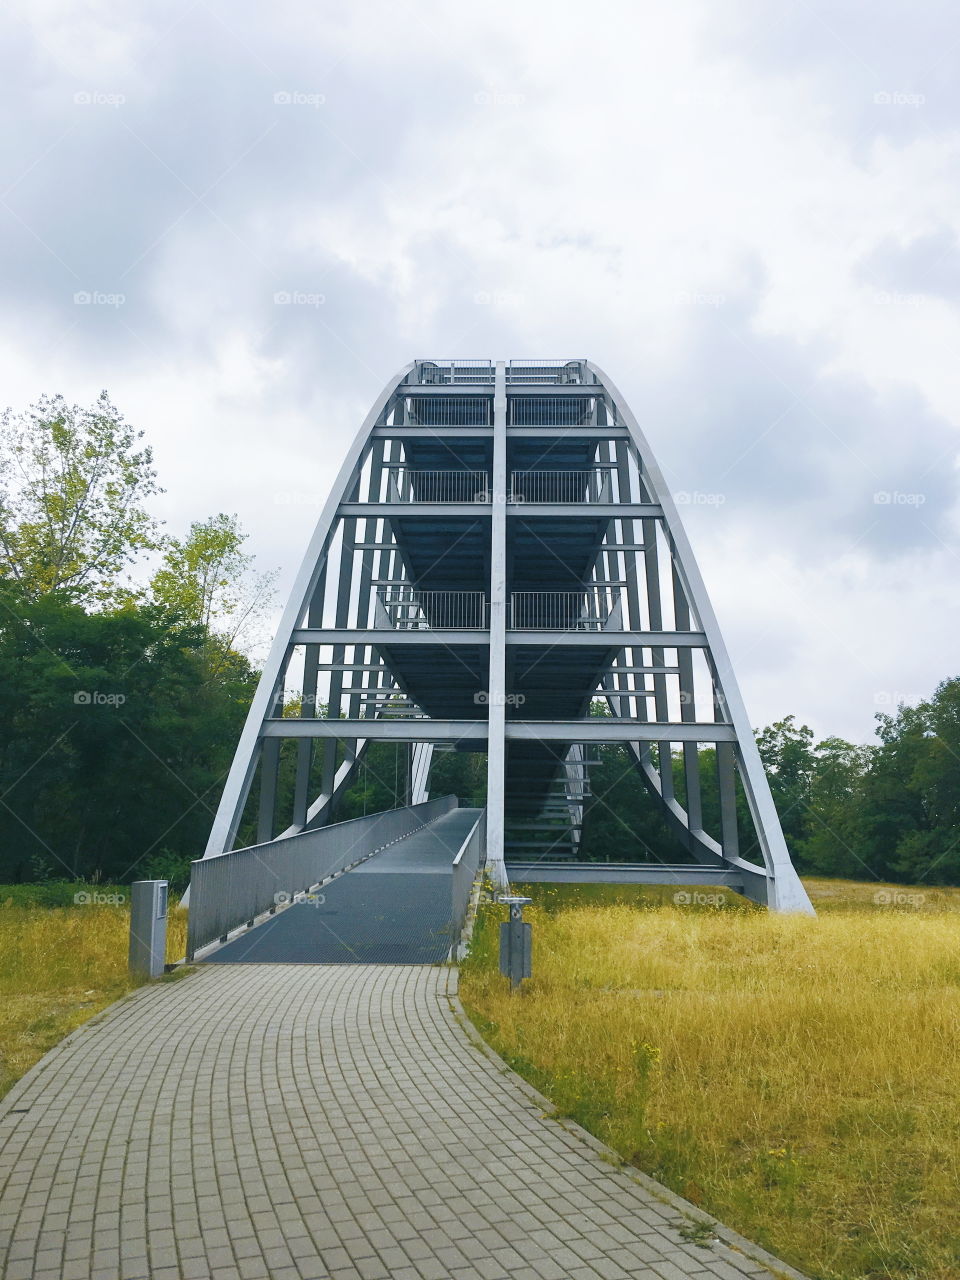 Detailed architecture of this viewing platform in Bitterfeld